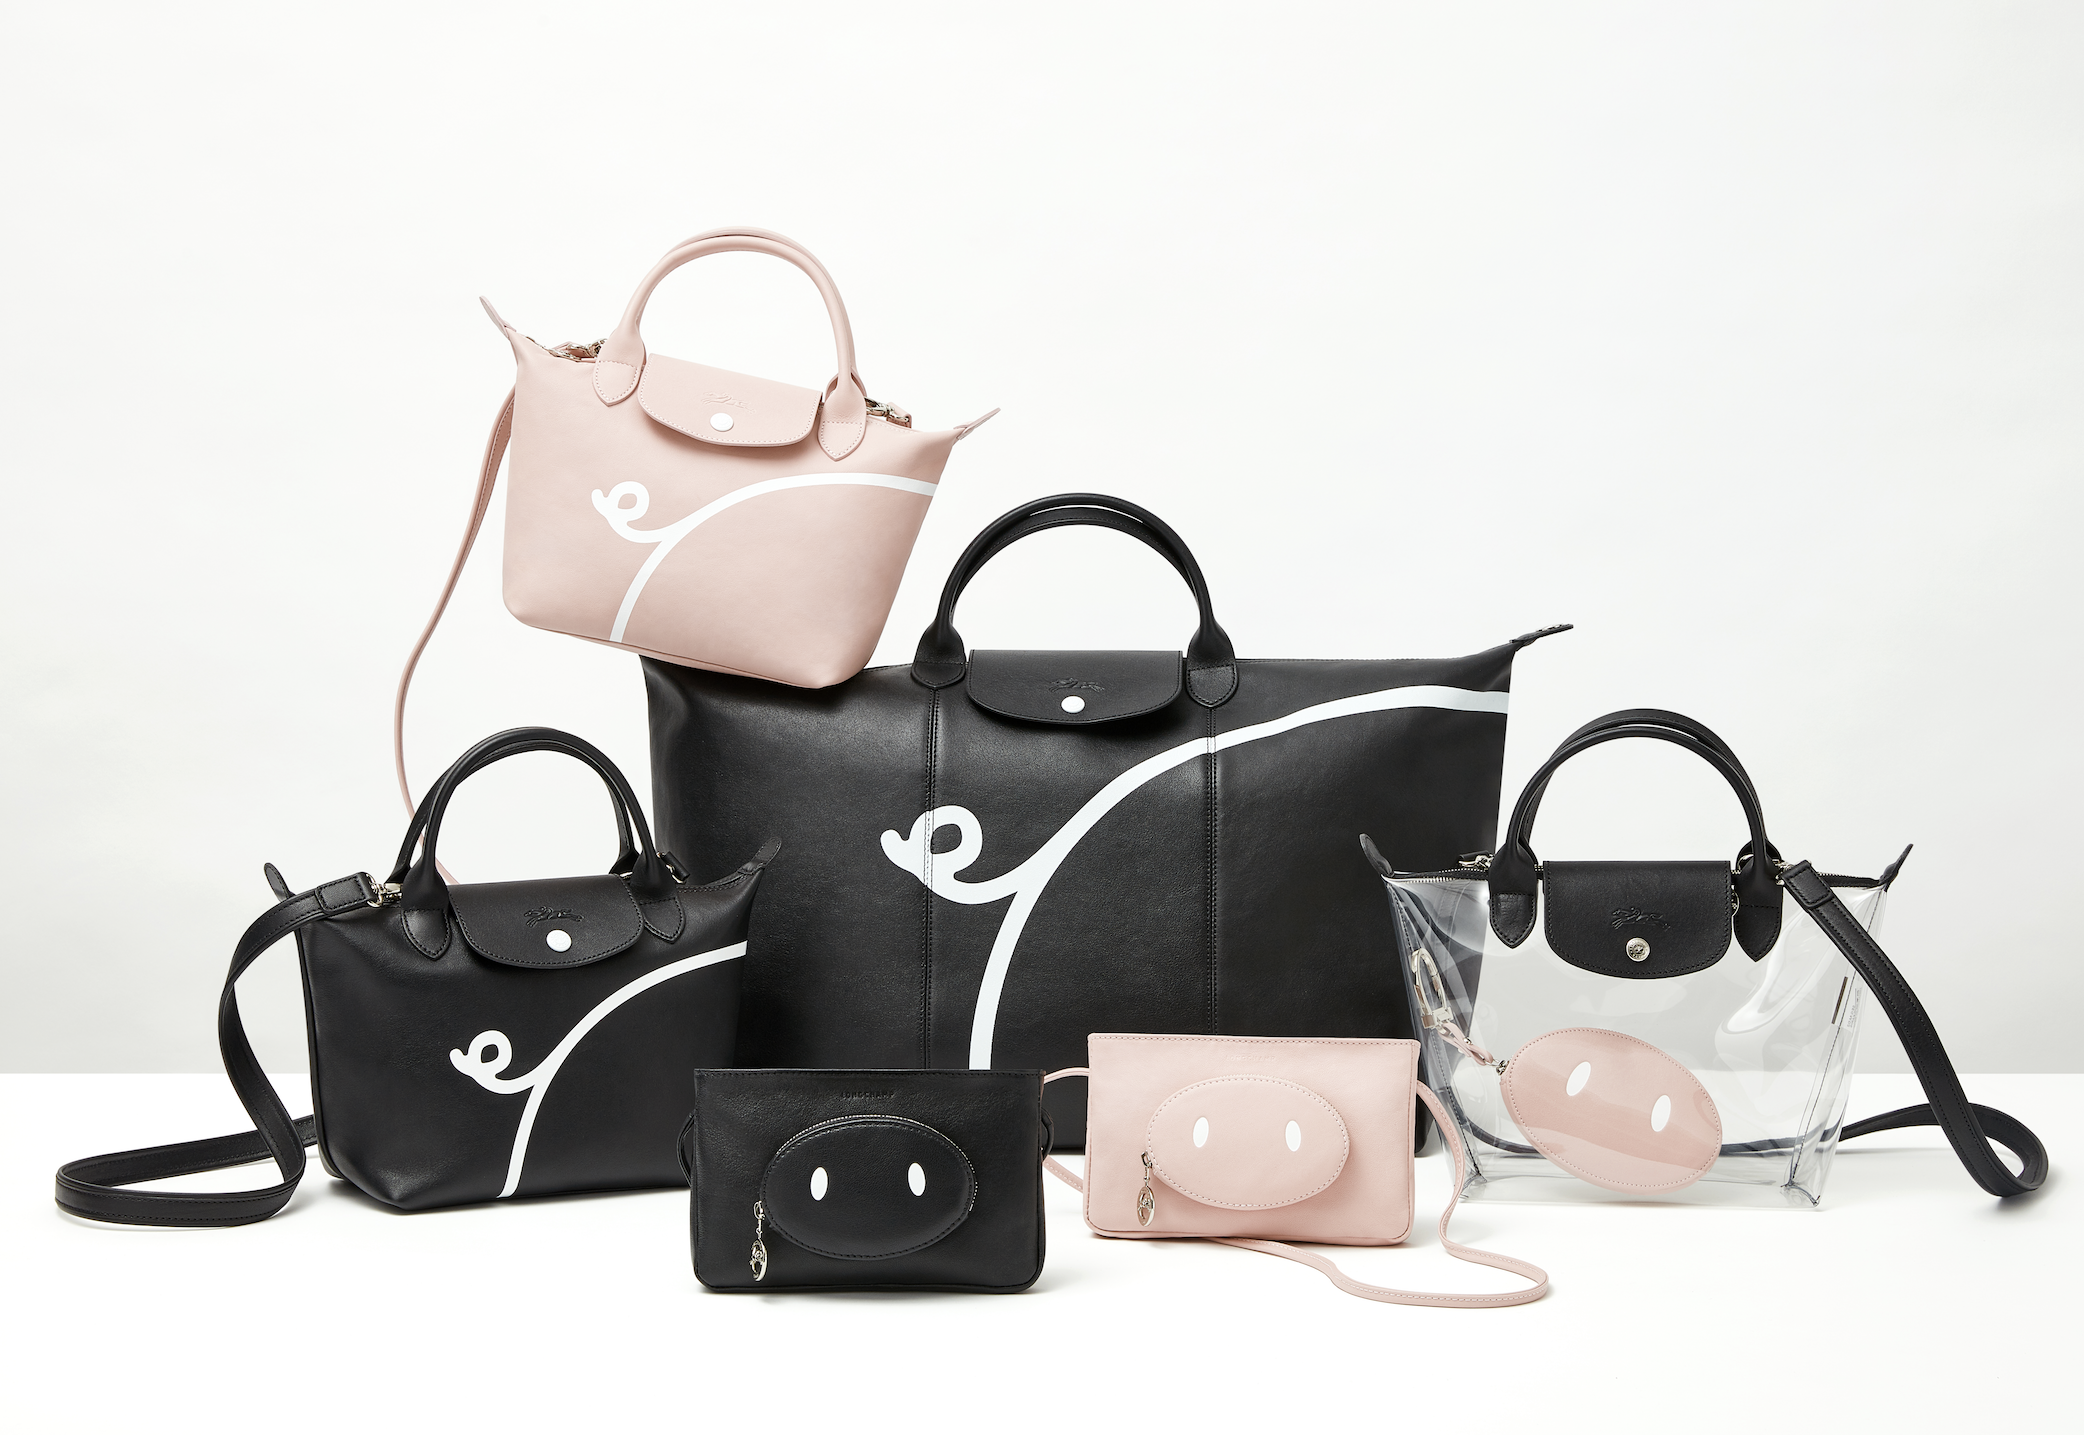 Longchamp collaborated with KOL Mr. Bags to design a special edition for the Year of Pigs. Photo: courtesy of Longchamp